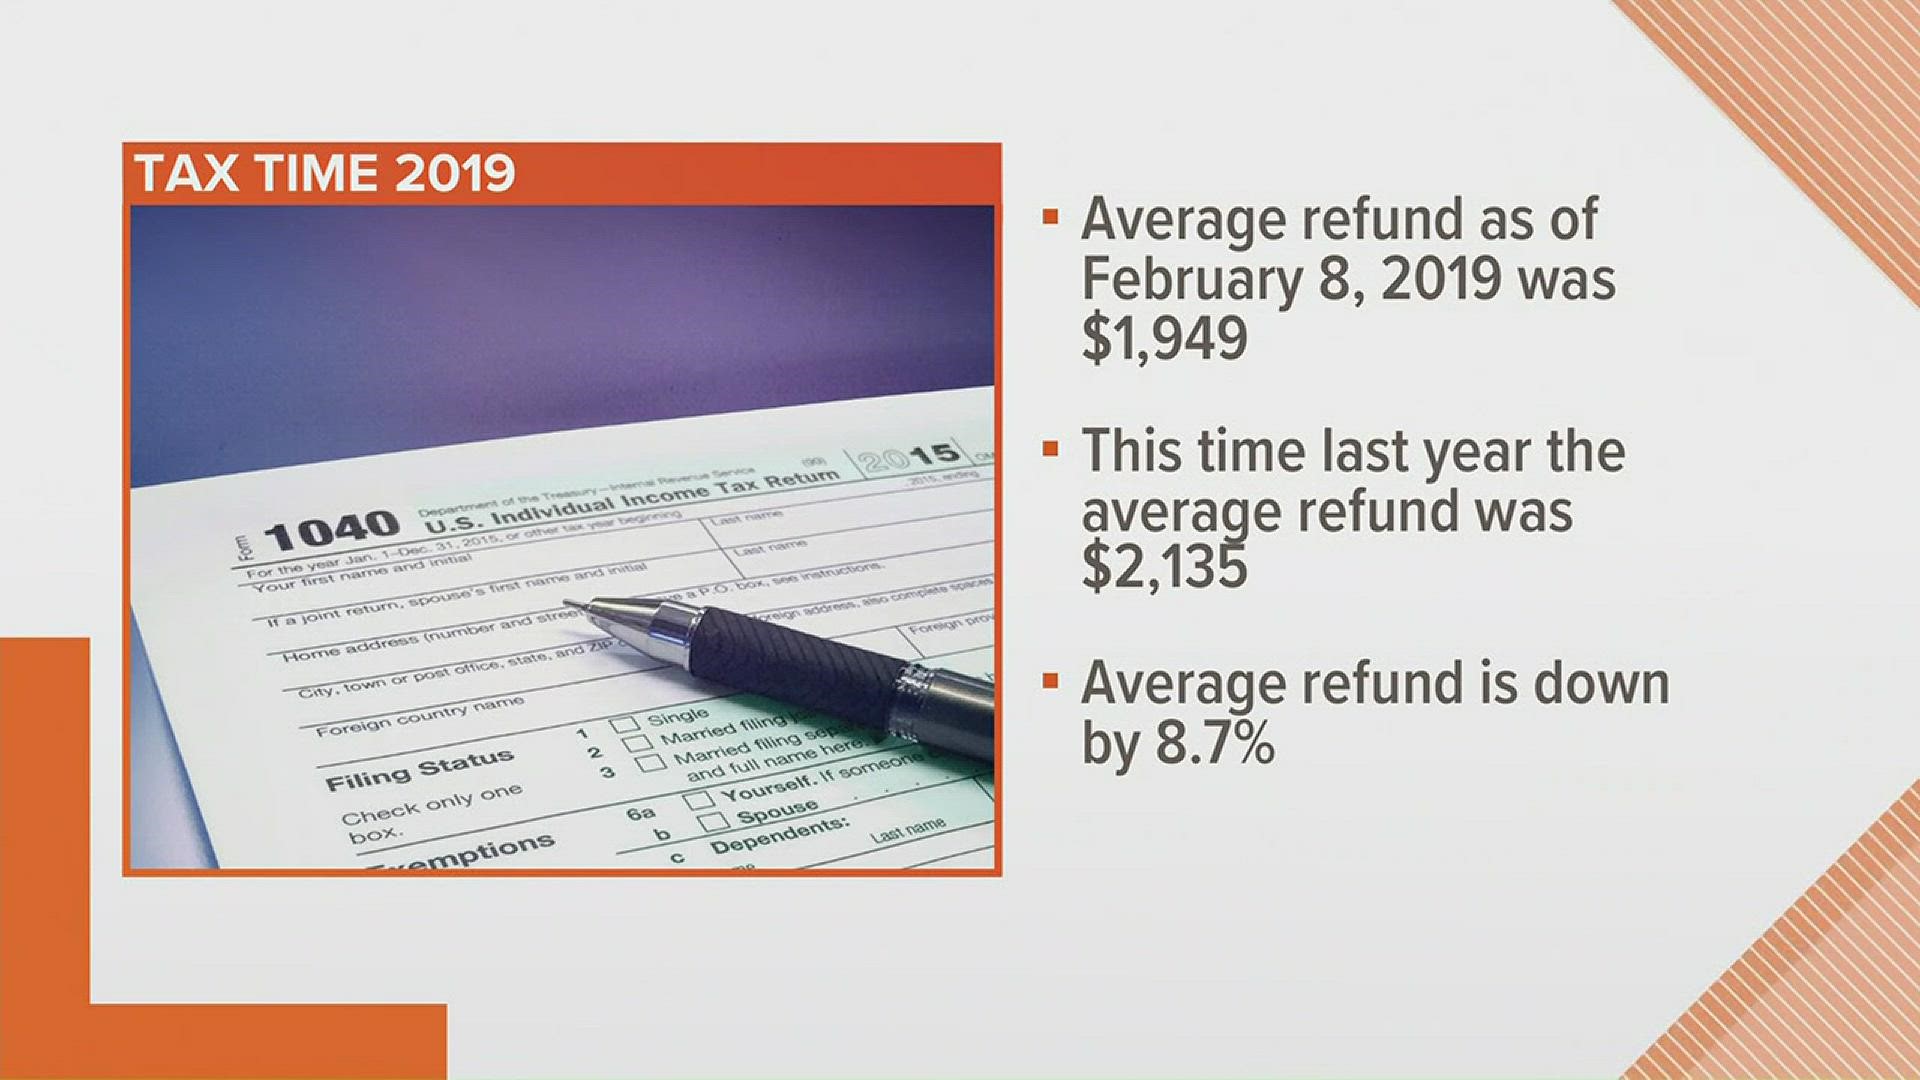 A certified public accountant discusses the new tax law and what people can expect when they file this year.